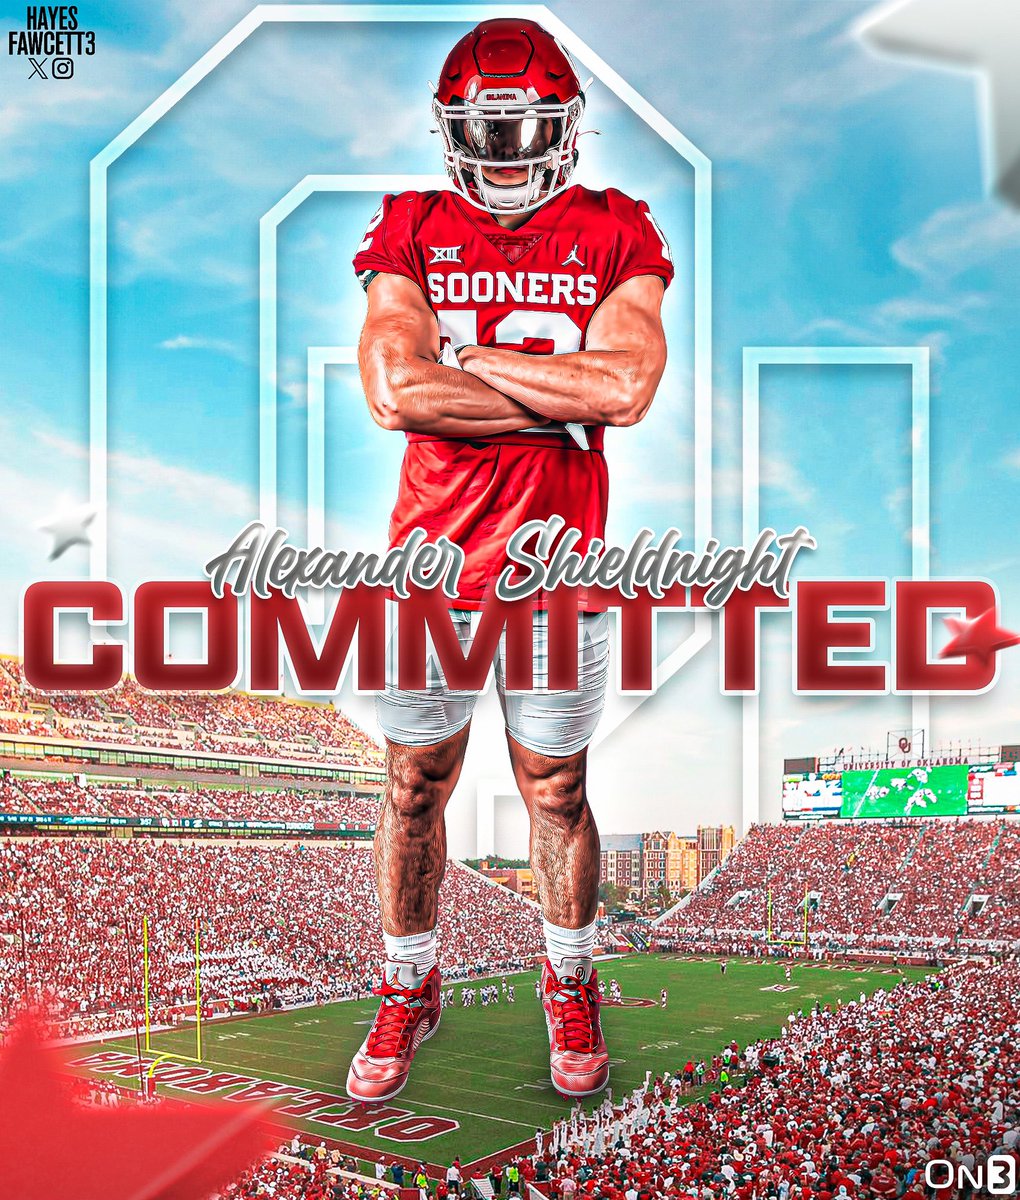 BREAKING: Class of 2025 EDGE Alexander Shieldnight tells me he has Committed to Oklahoma! The 6’3 230 EDGE from Wagoner, OK chose the Sooners over Arkansas, Tennessee, & others “I’m fortunate for the opportunity! Let’s get to work…” on3.com/college/oklaho…